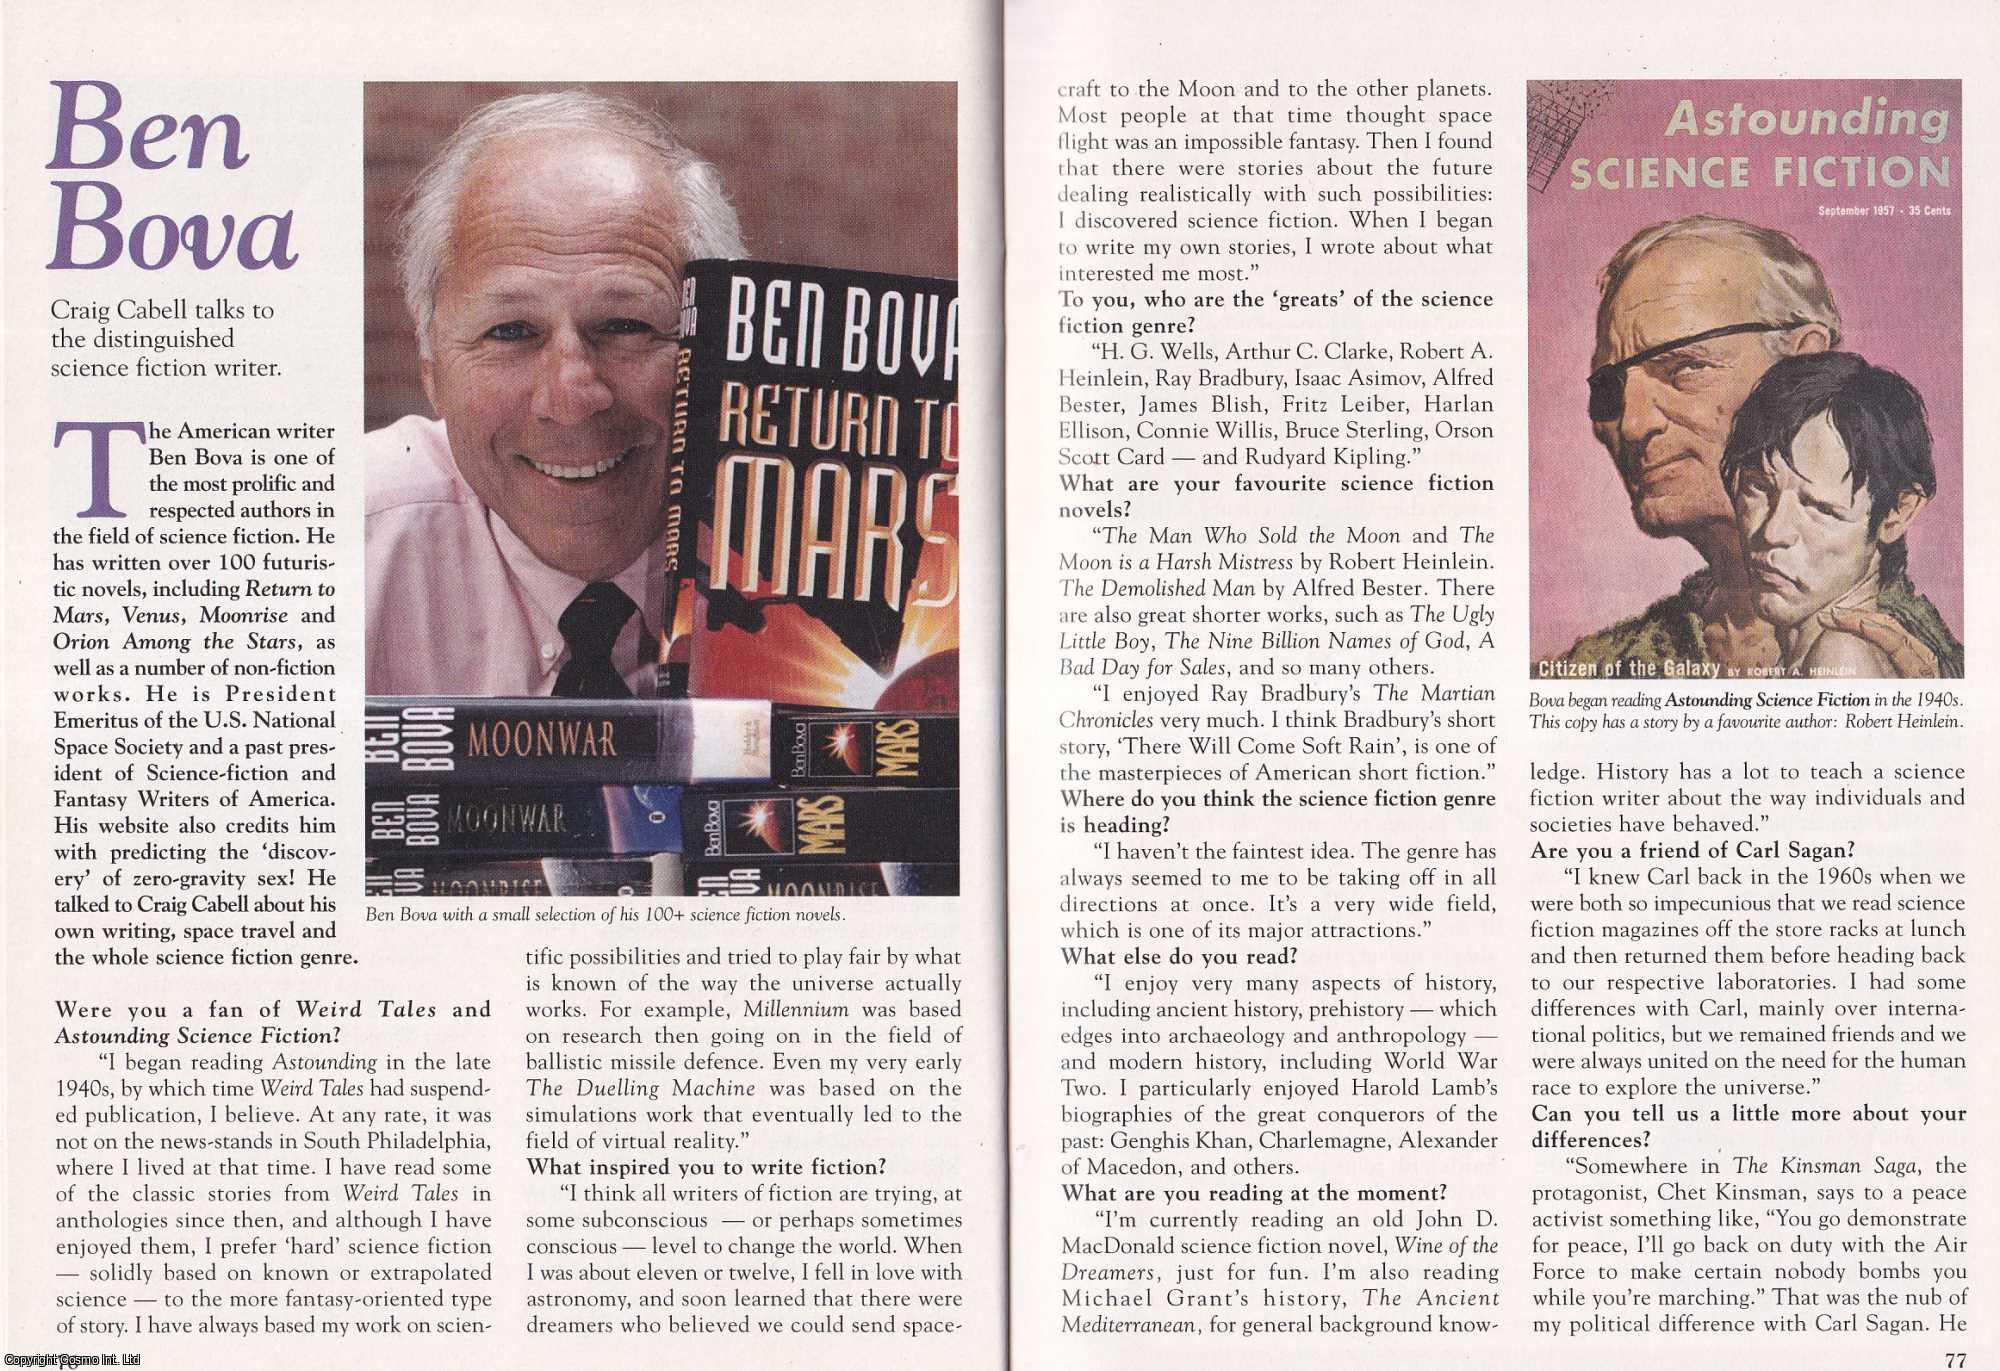 Craig Cabell - Ben Bova (science fiction writer). This is an original article separated from an issue of The Book & Magazine Collector publication.